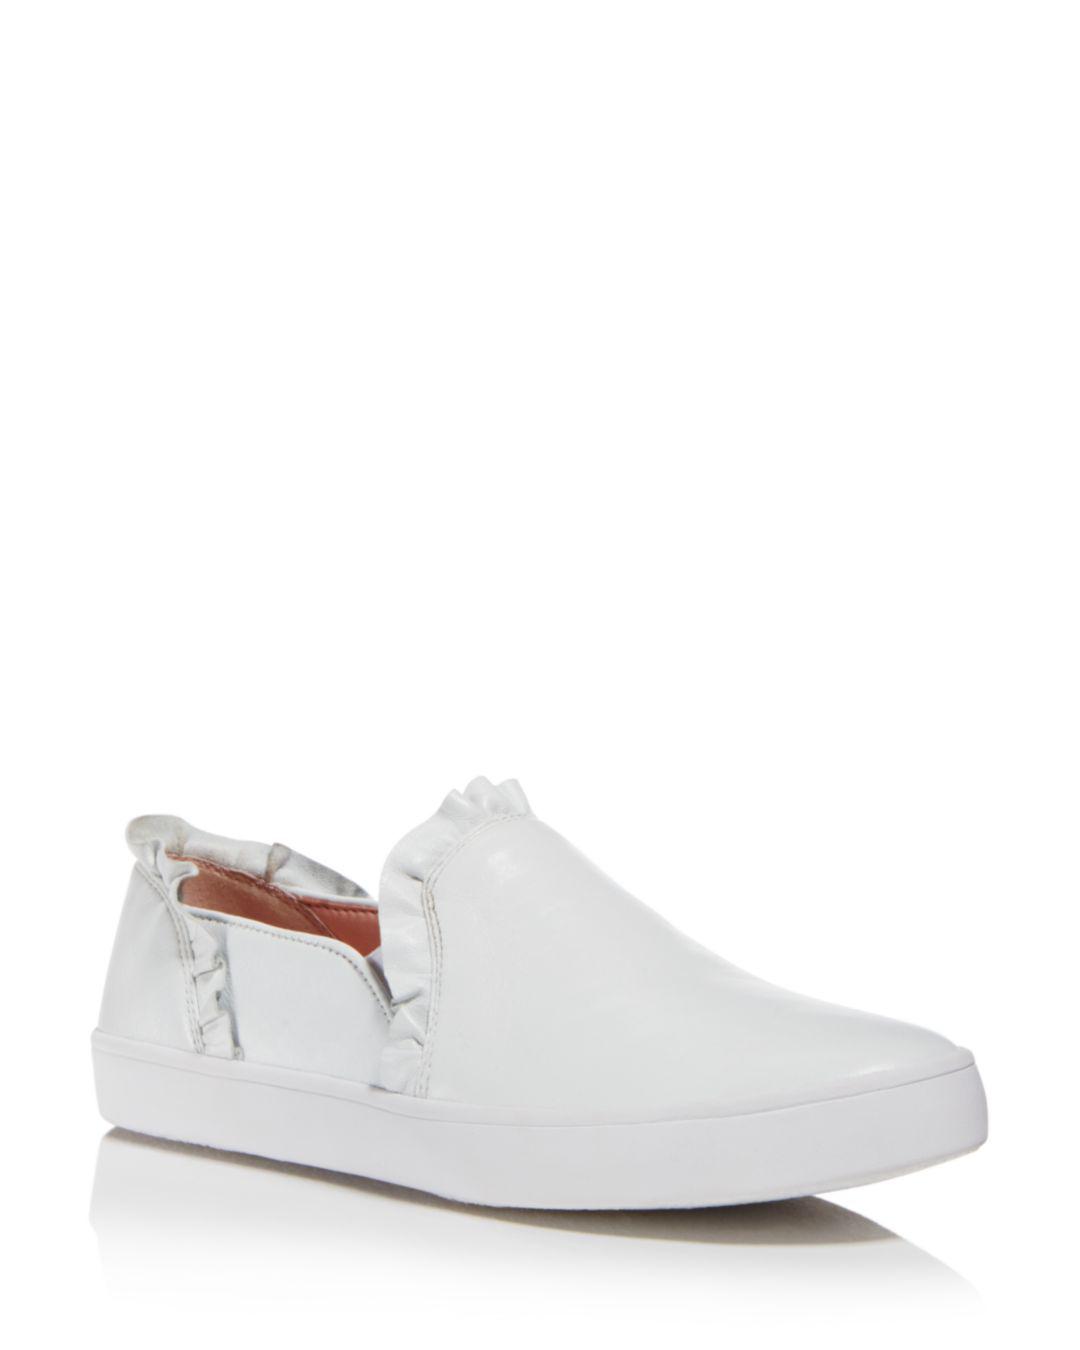 kate spade white lilly sneakers